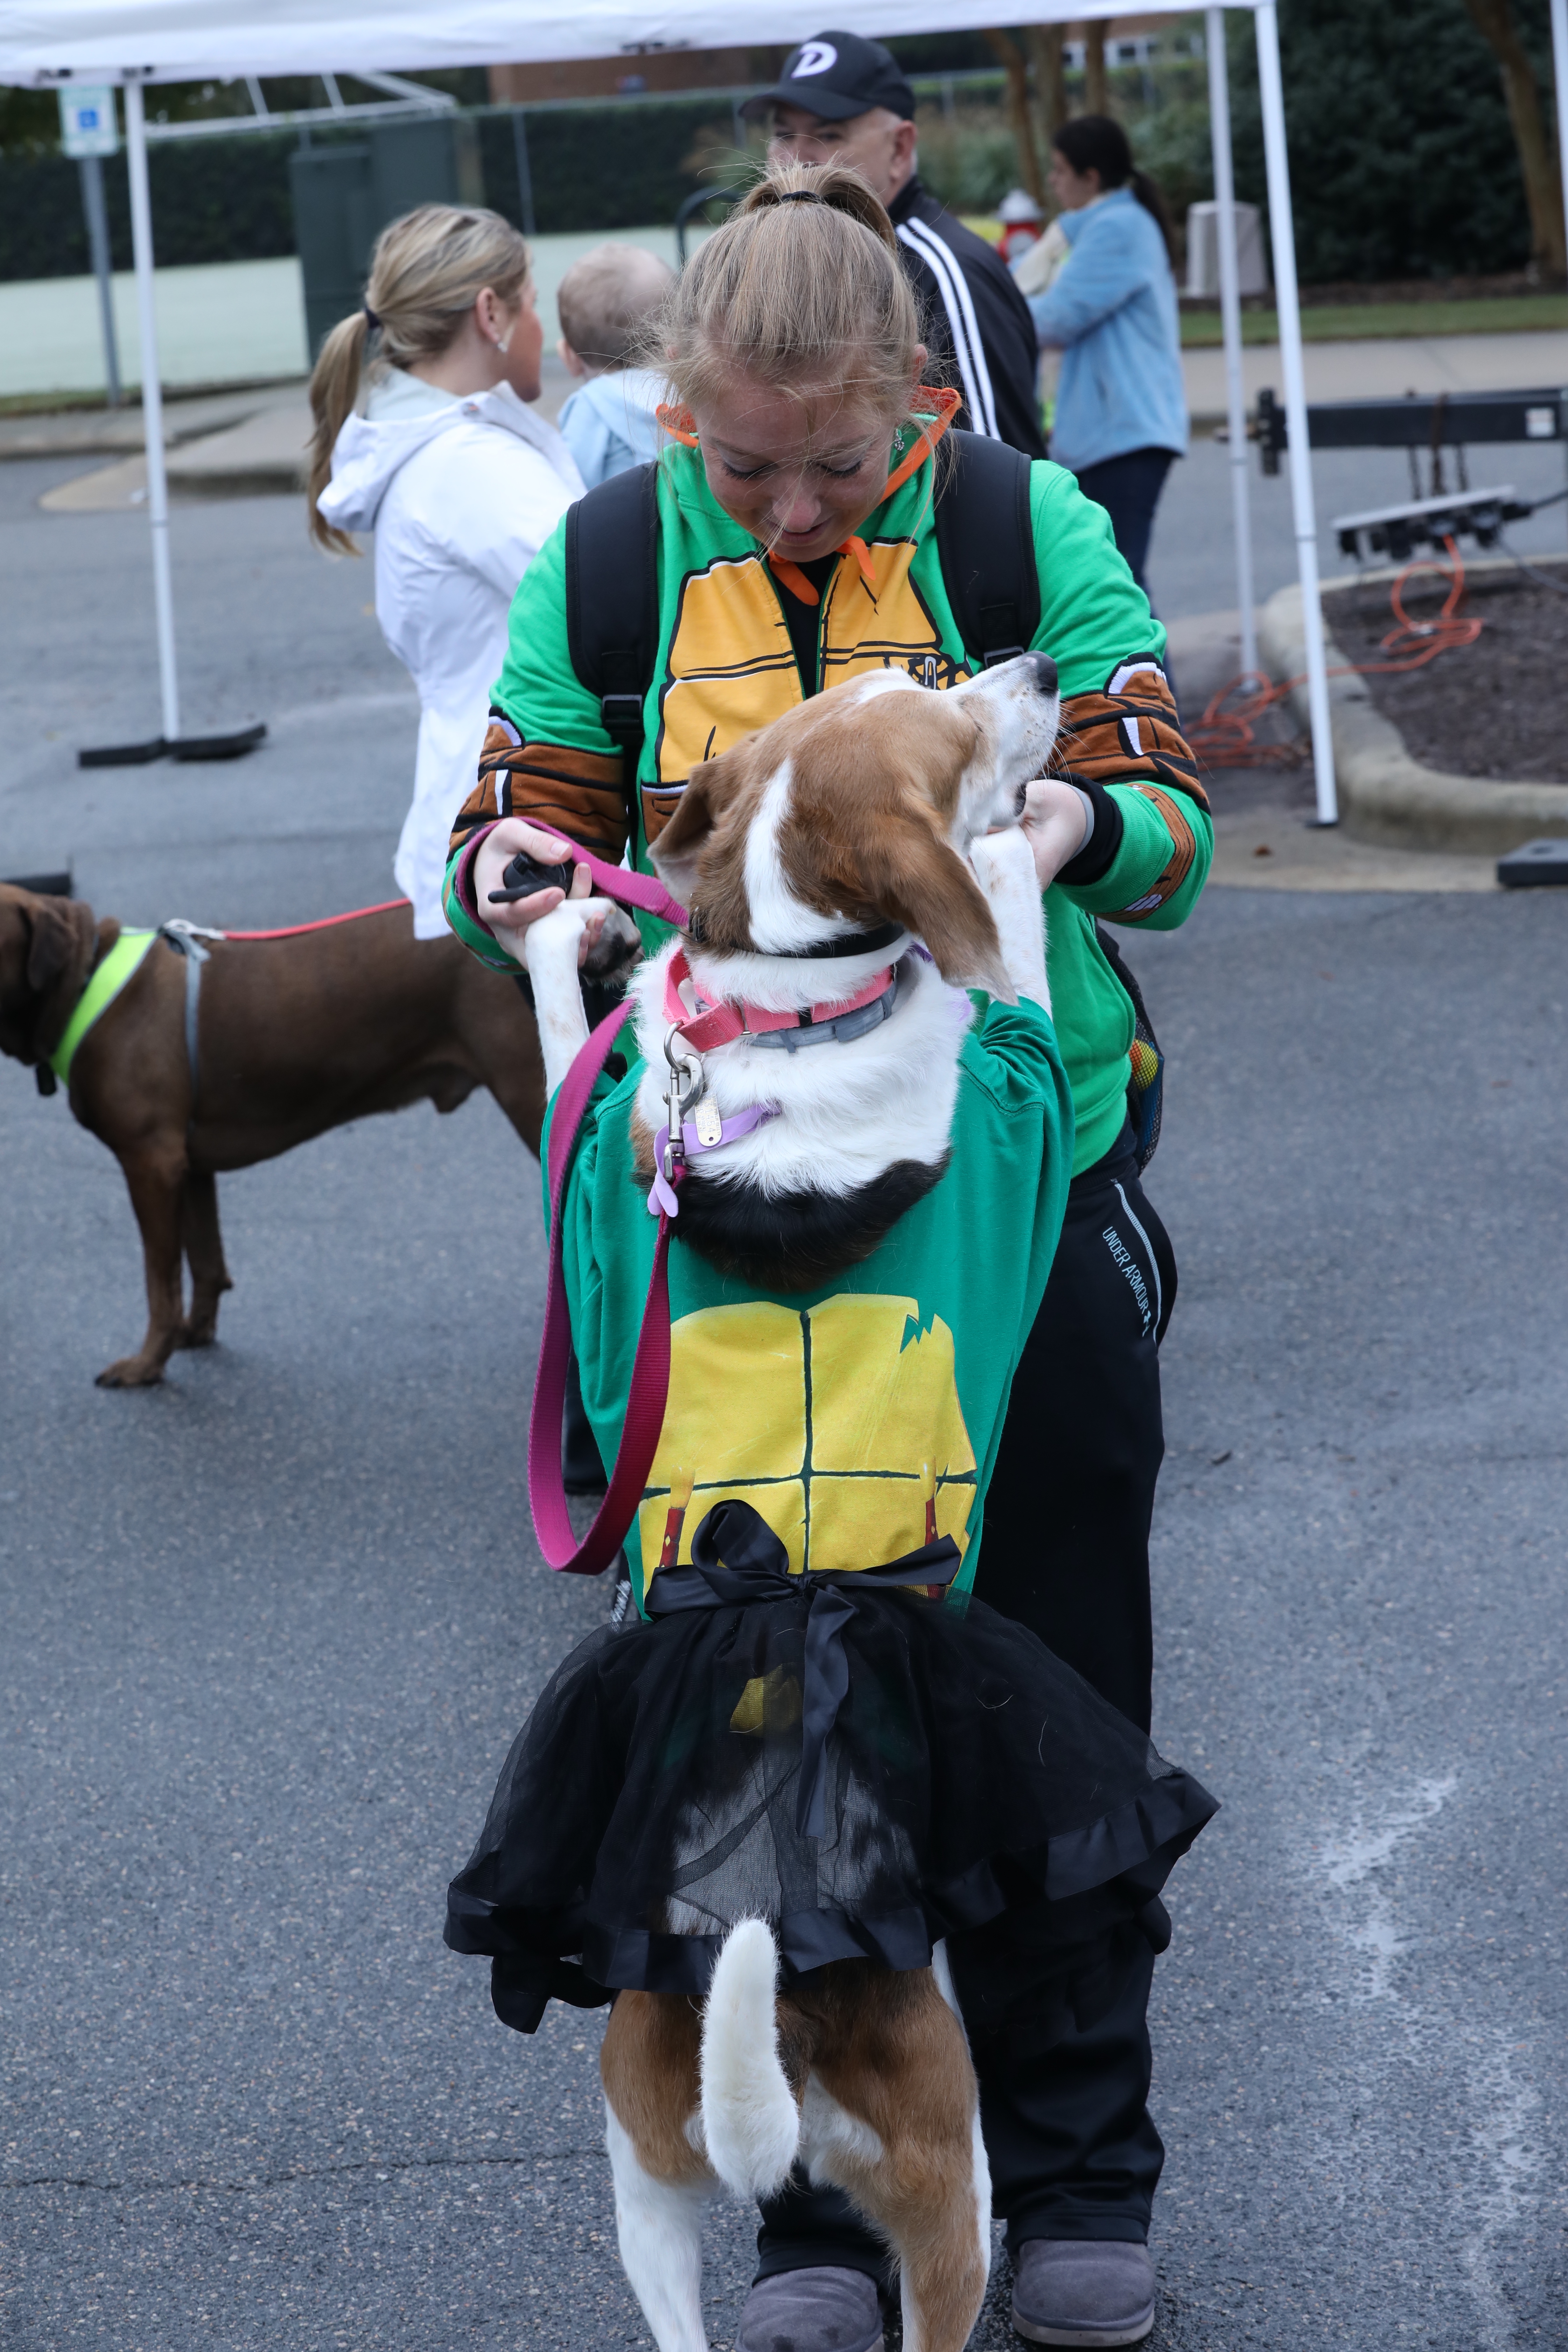 We love seeing your four-legged family members too! Costumes are a bonus :-)